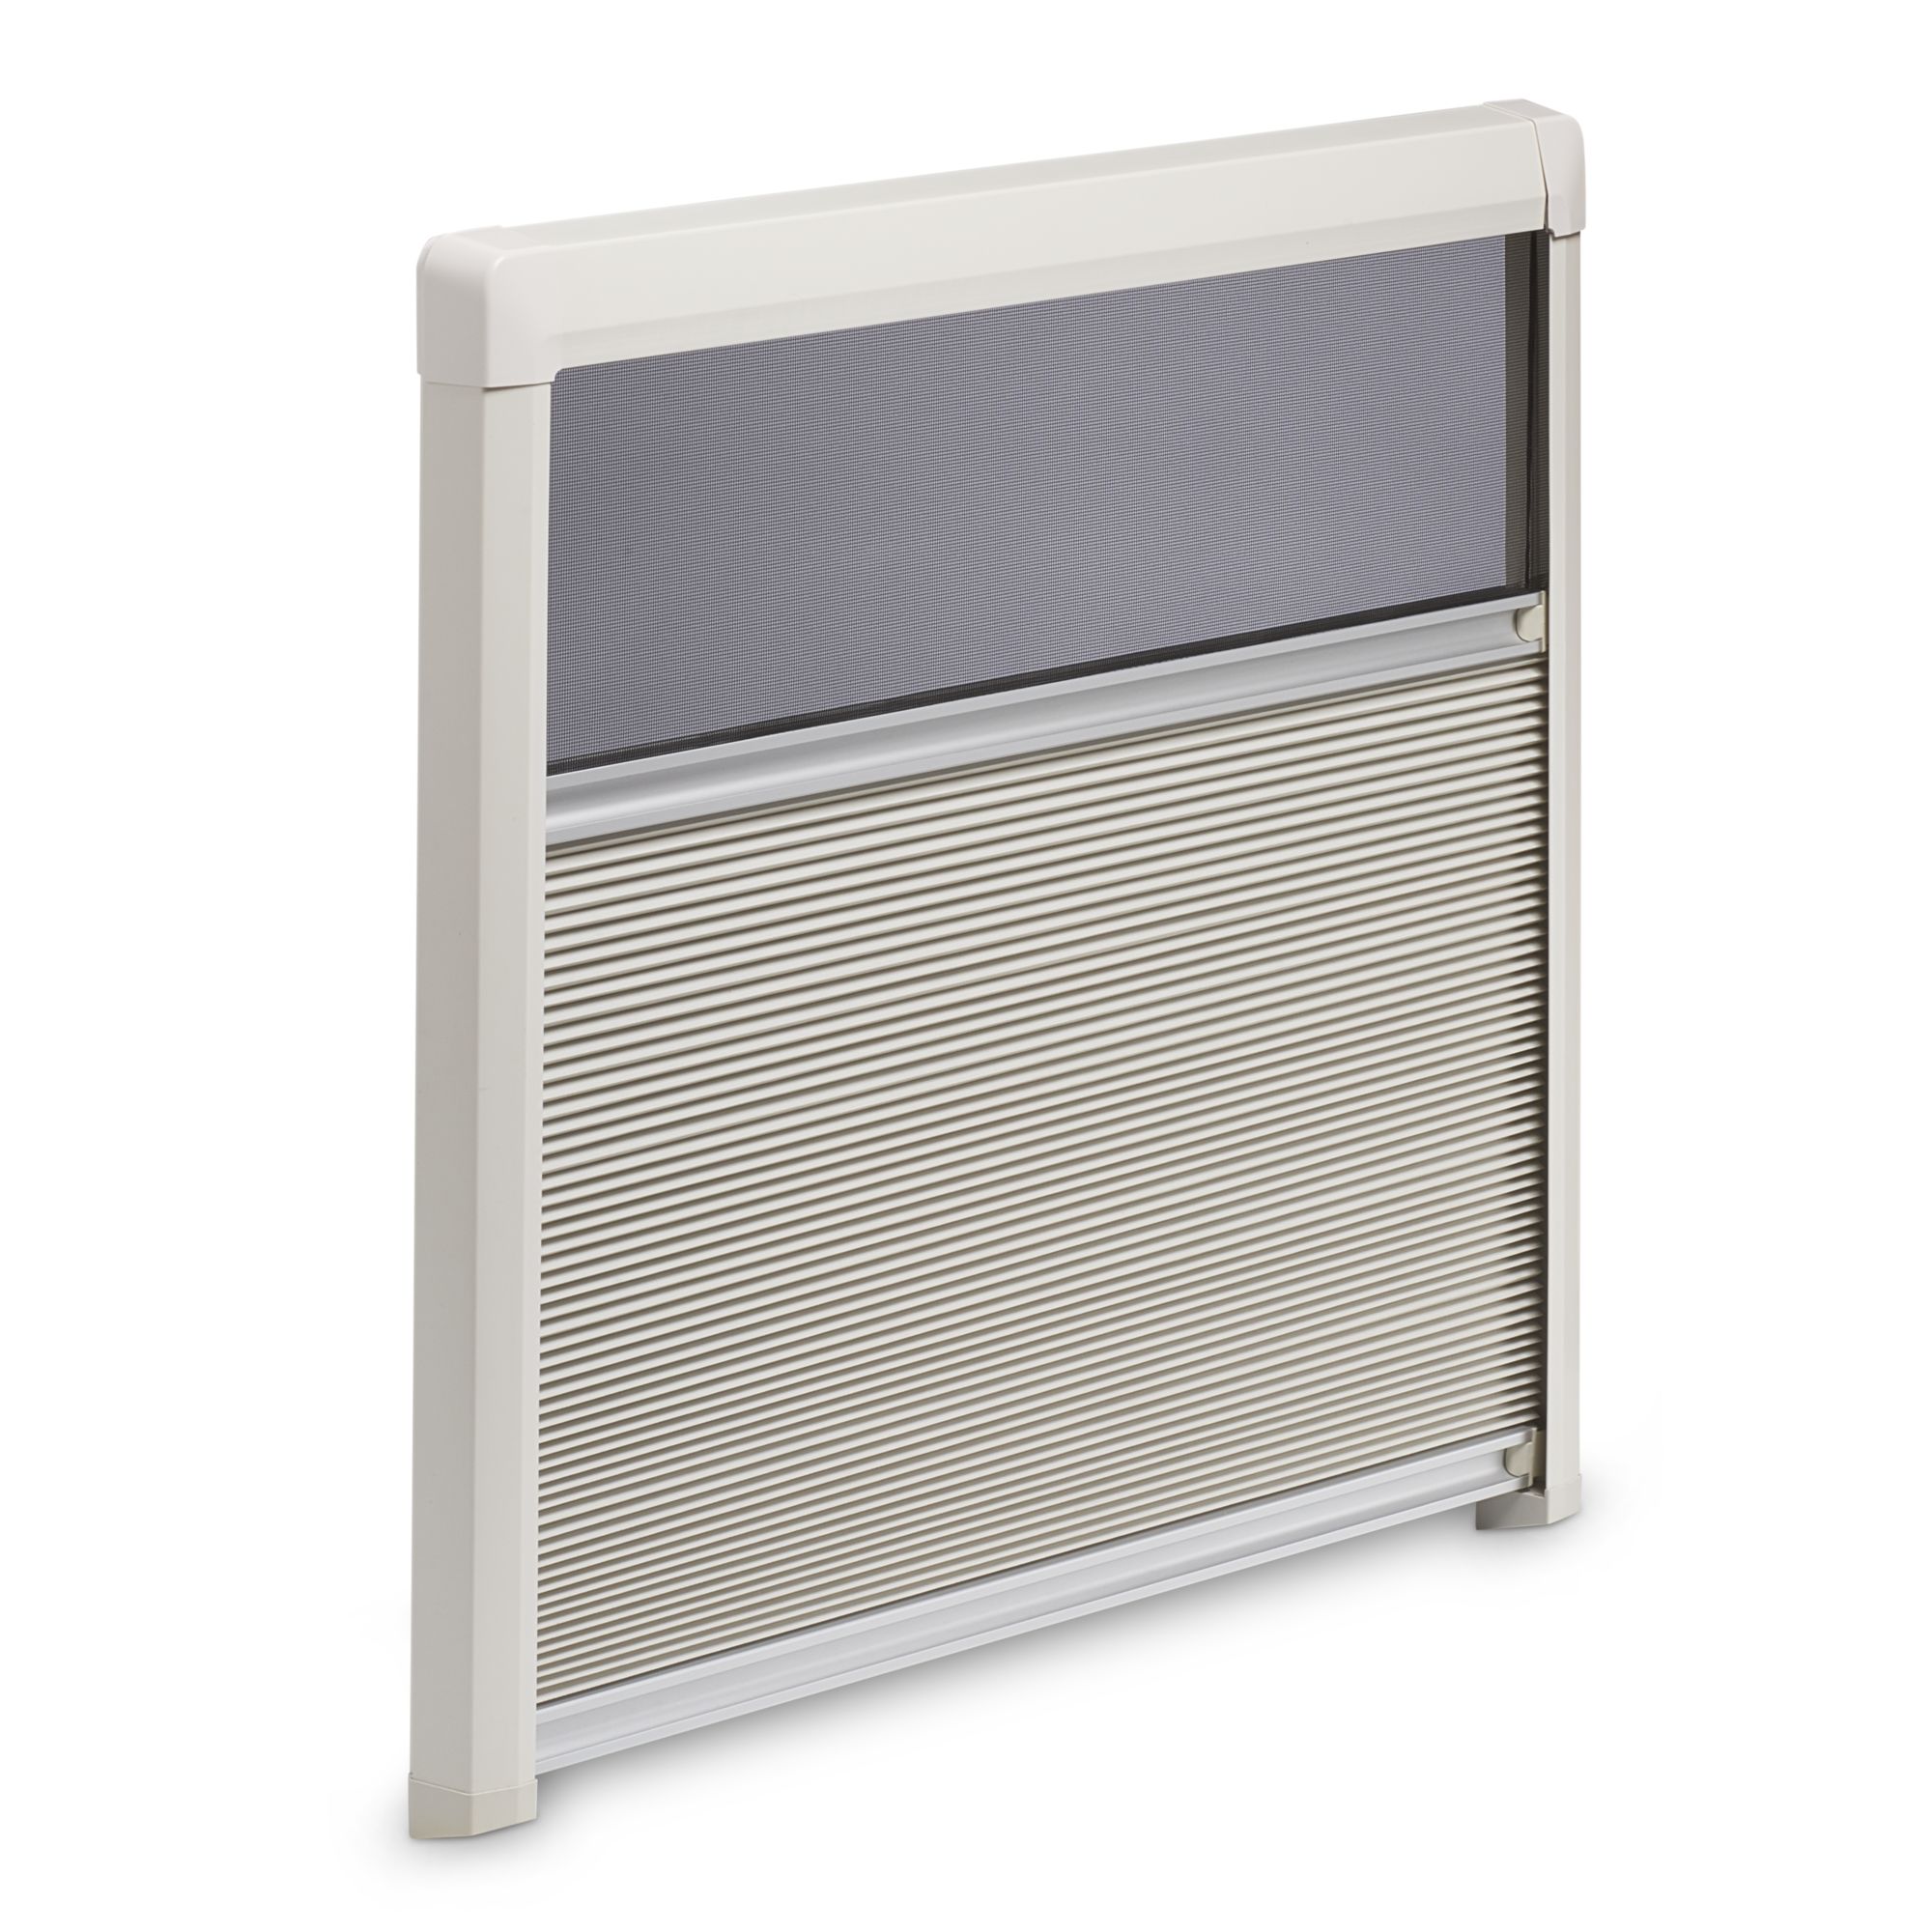 Dometic DB3H Roller Blind double-pleated, 1285 x 800 mm, creme-white